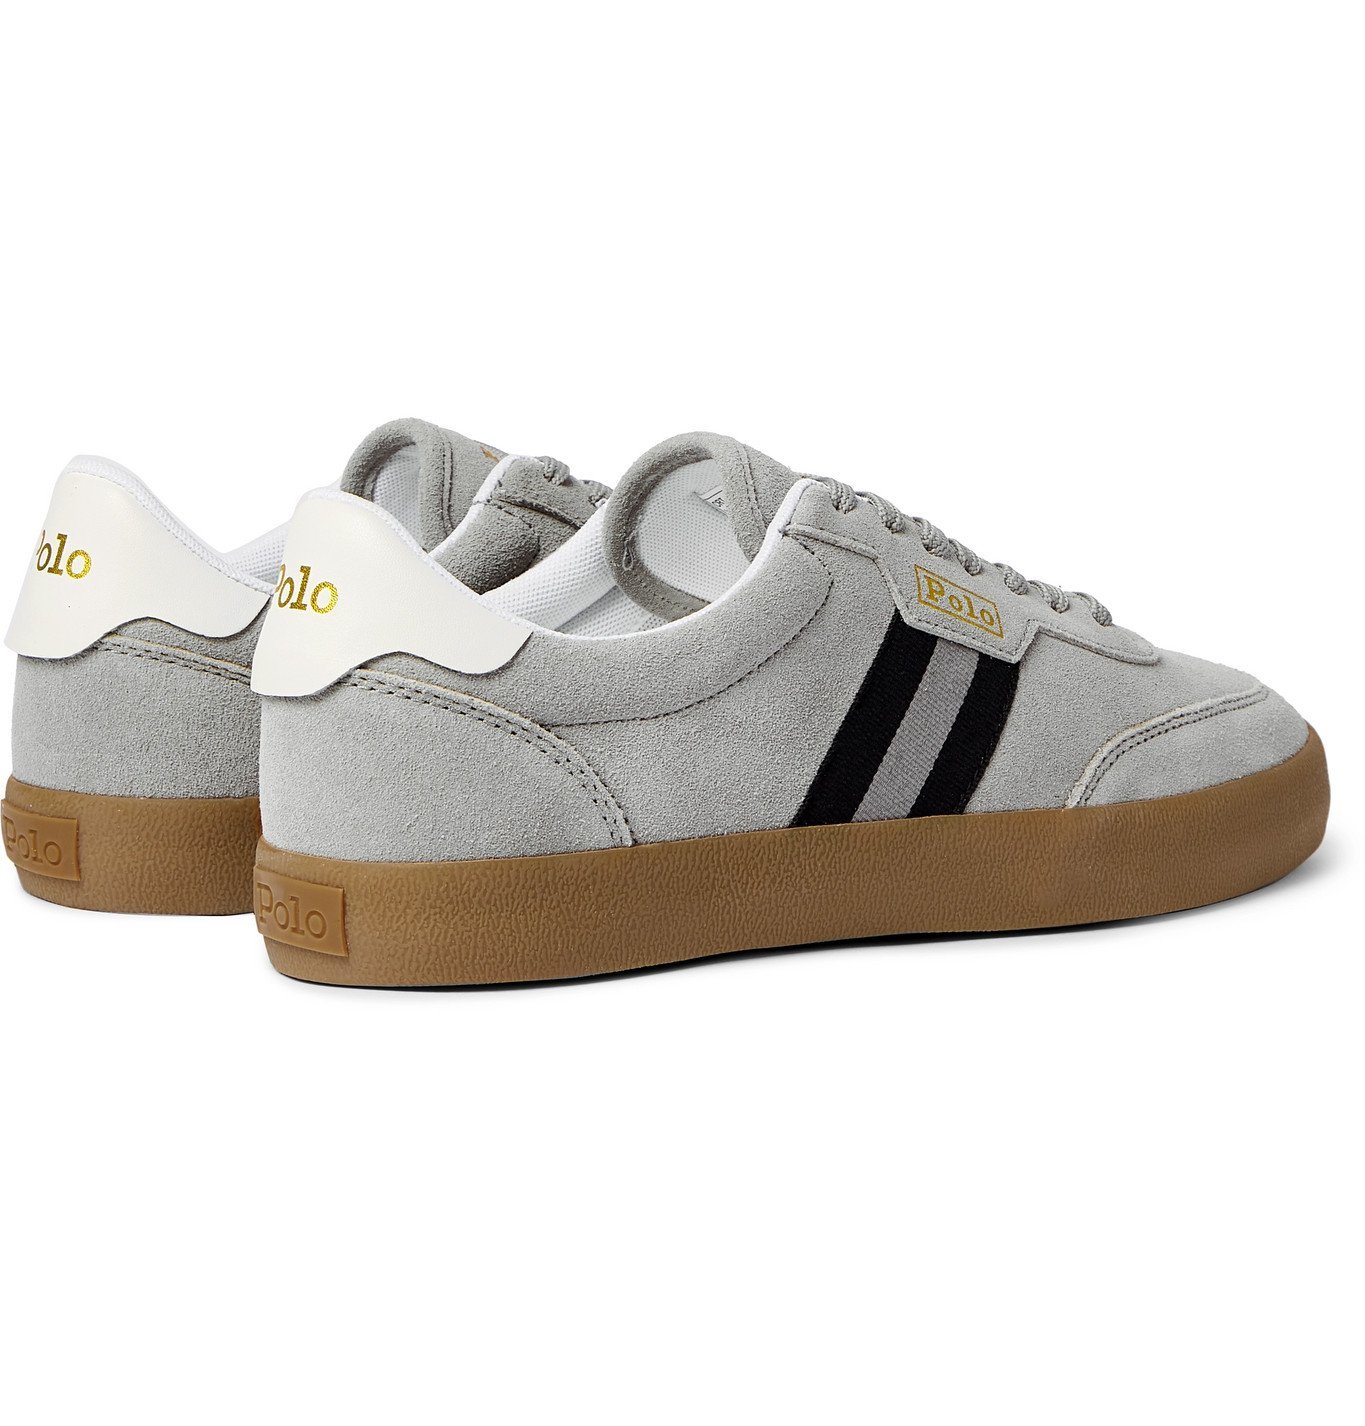 POLO RALPH LAUREN - Court VLC Grosgrain and Leather-Trimmed Suede Sneakers  - Gray Polo Ralph Lauren